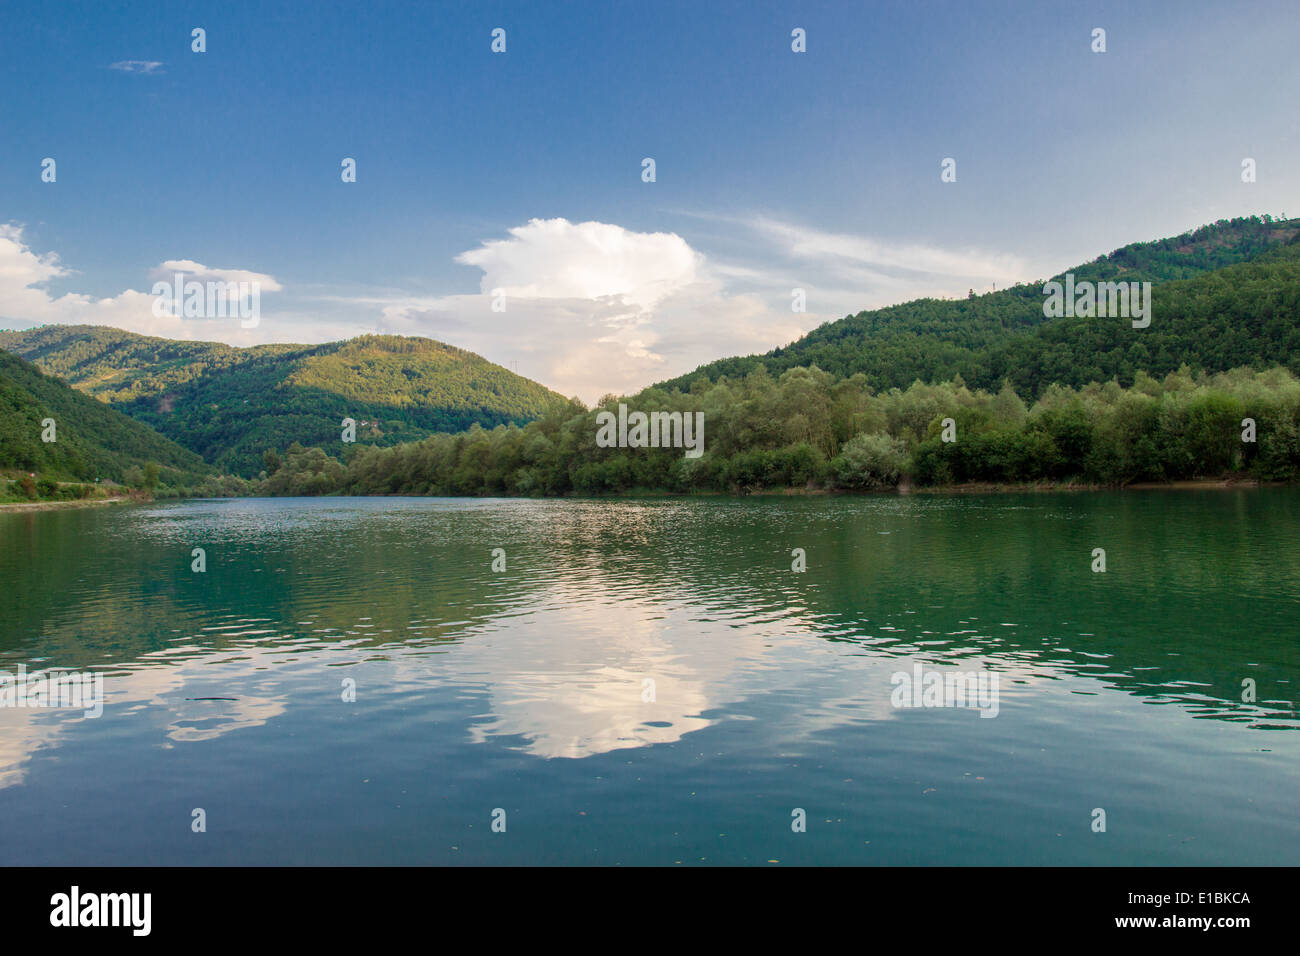 lake landscape surrounded by green hills with reflection Stock Photo